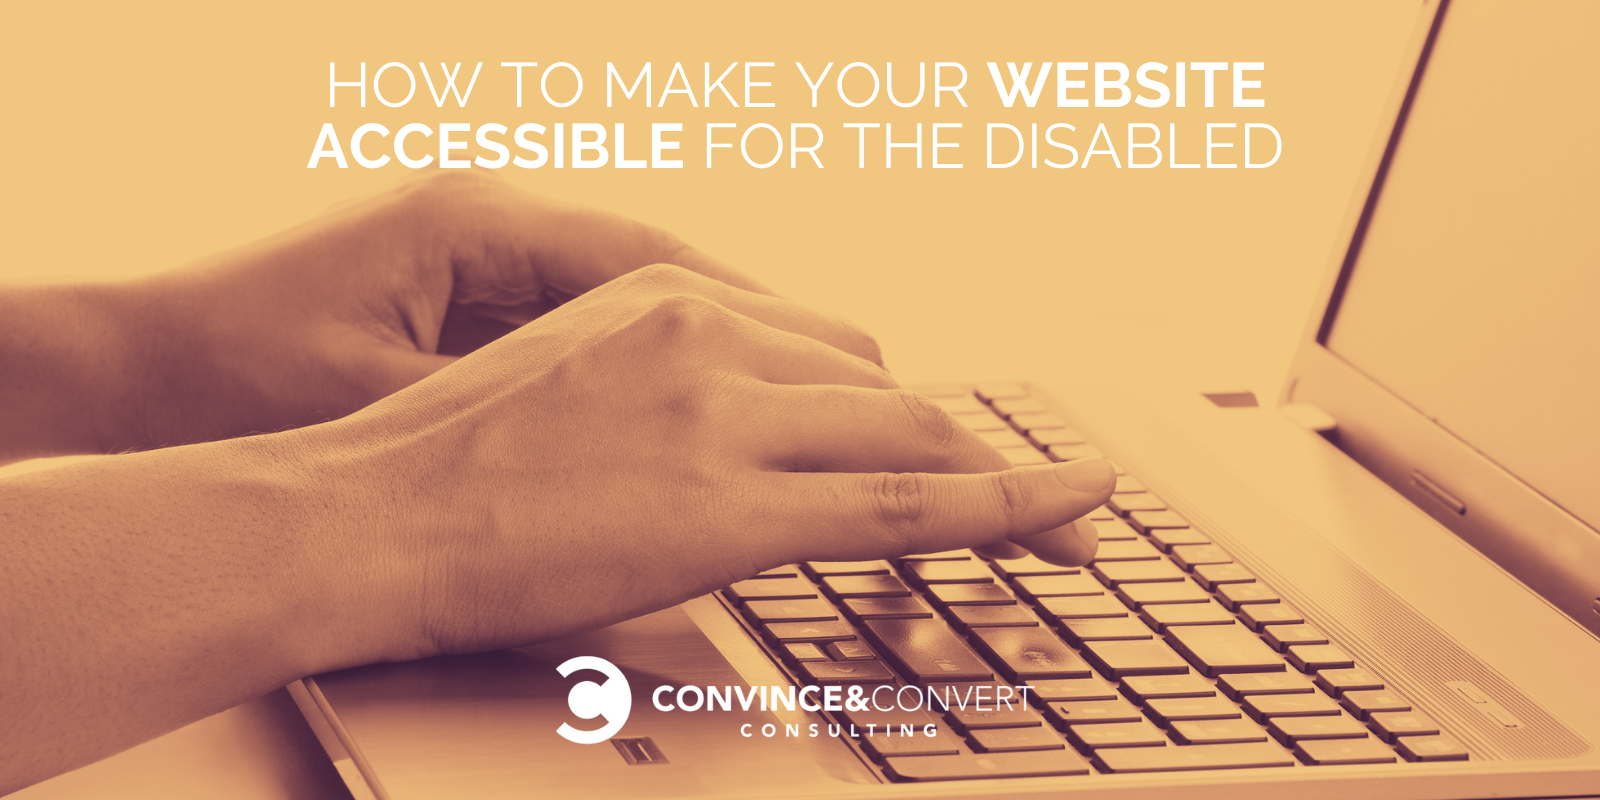 How to Make Your Website Accessible for the Disabled